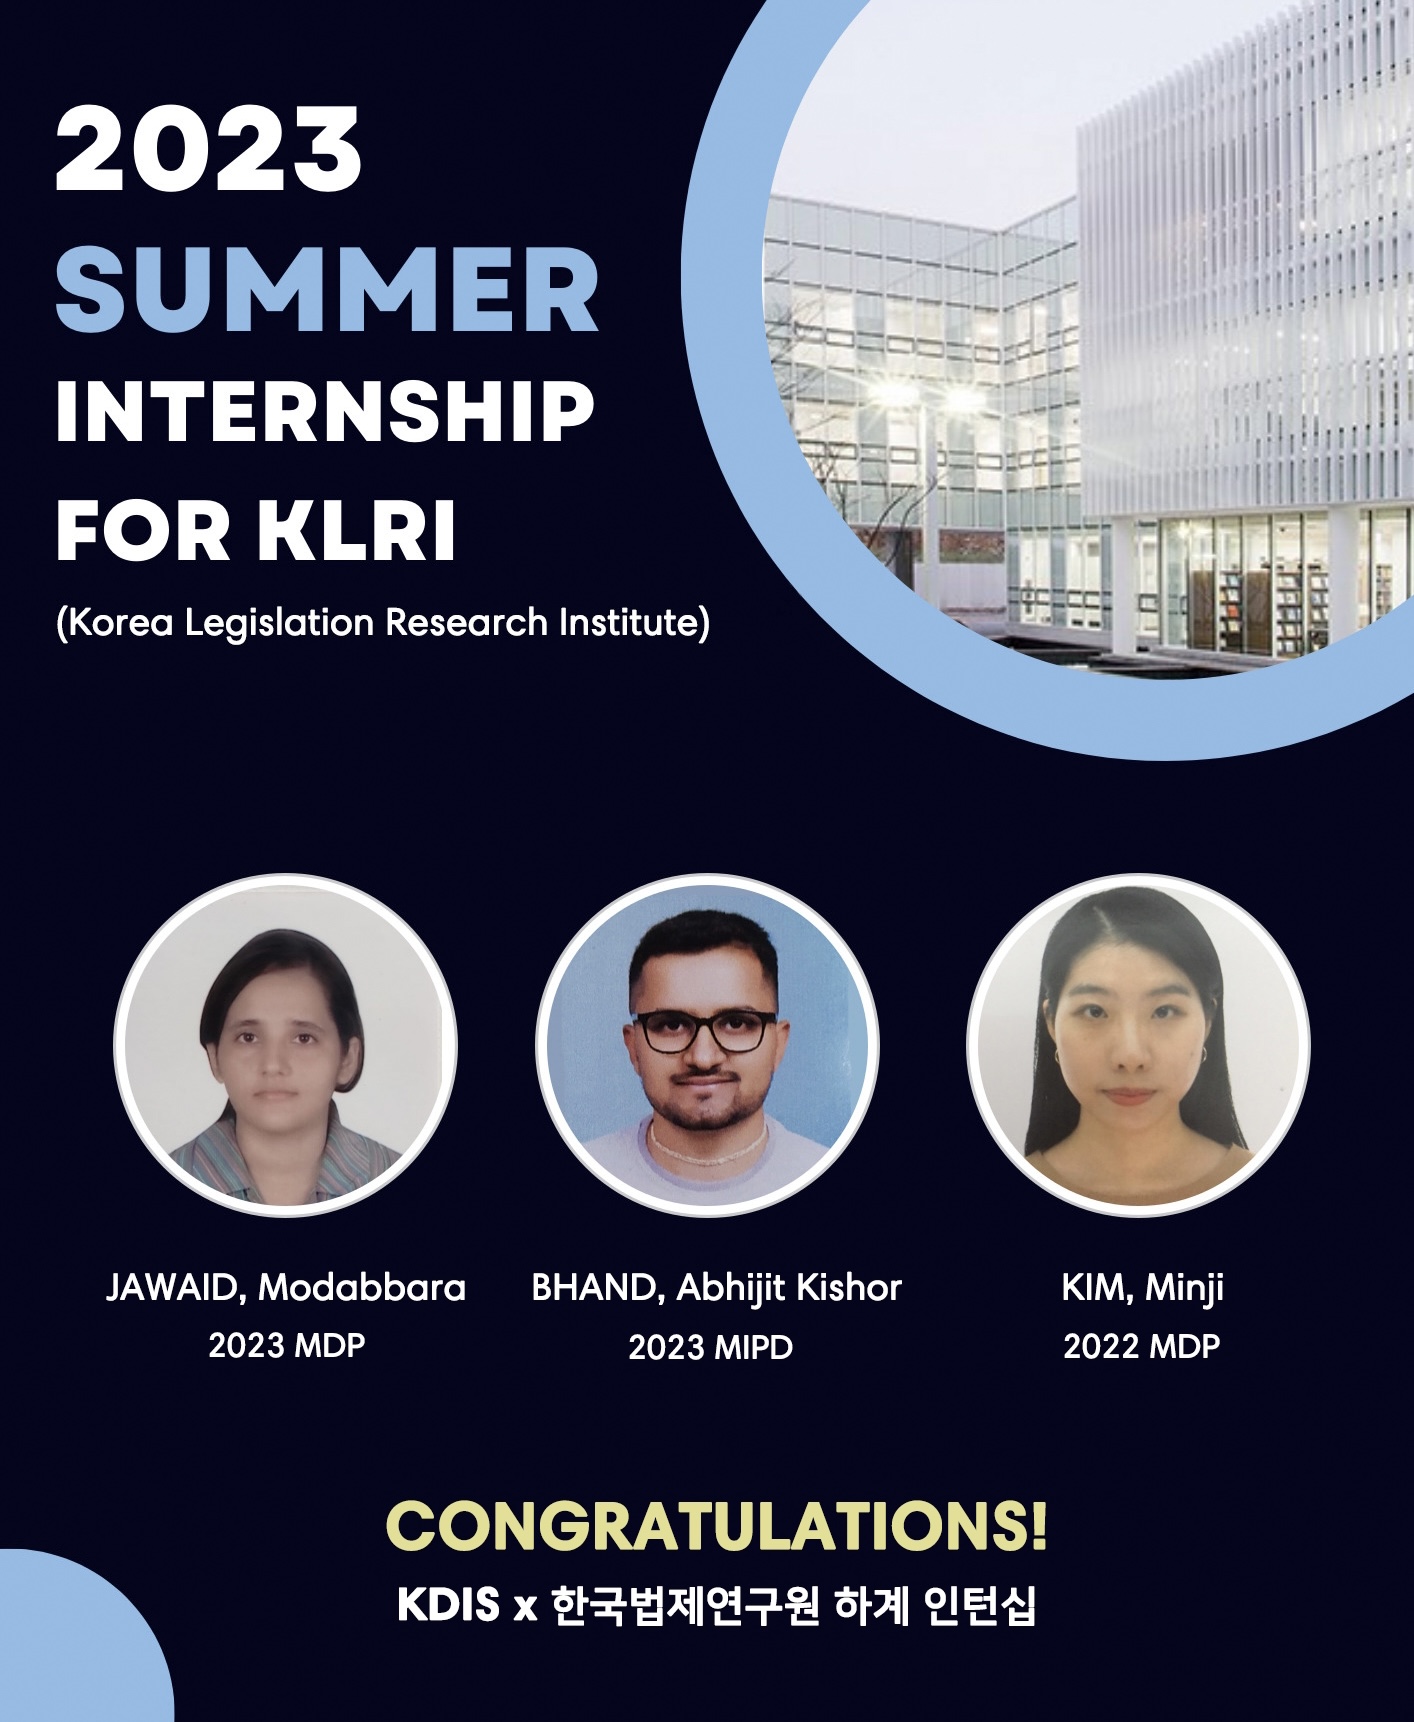 3 KDIS students have been selected for the 2023 Summer Internship at KLRI